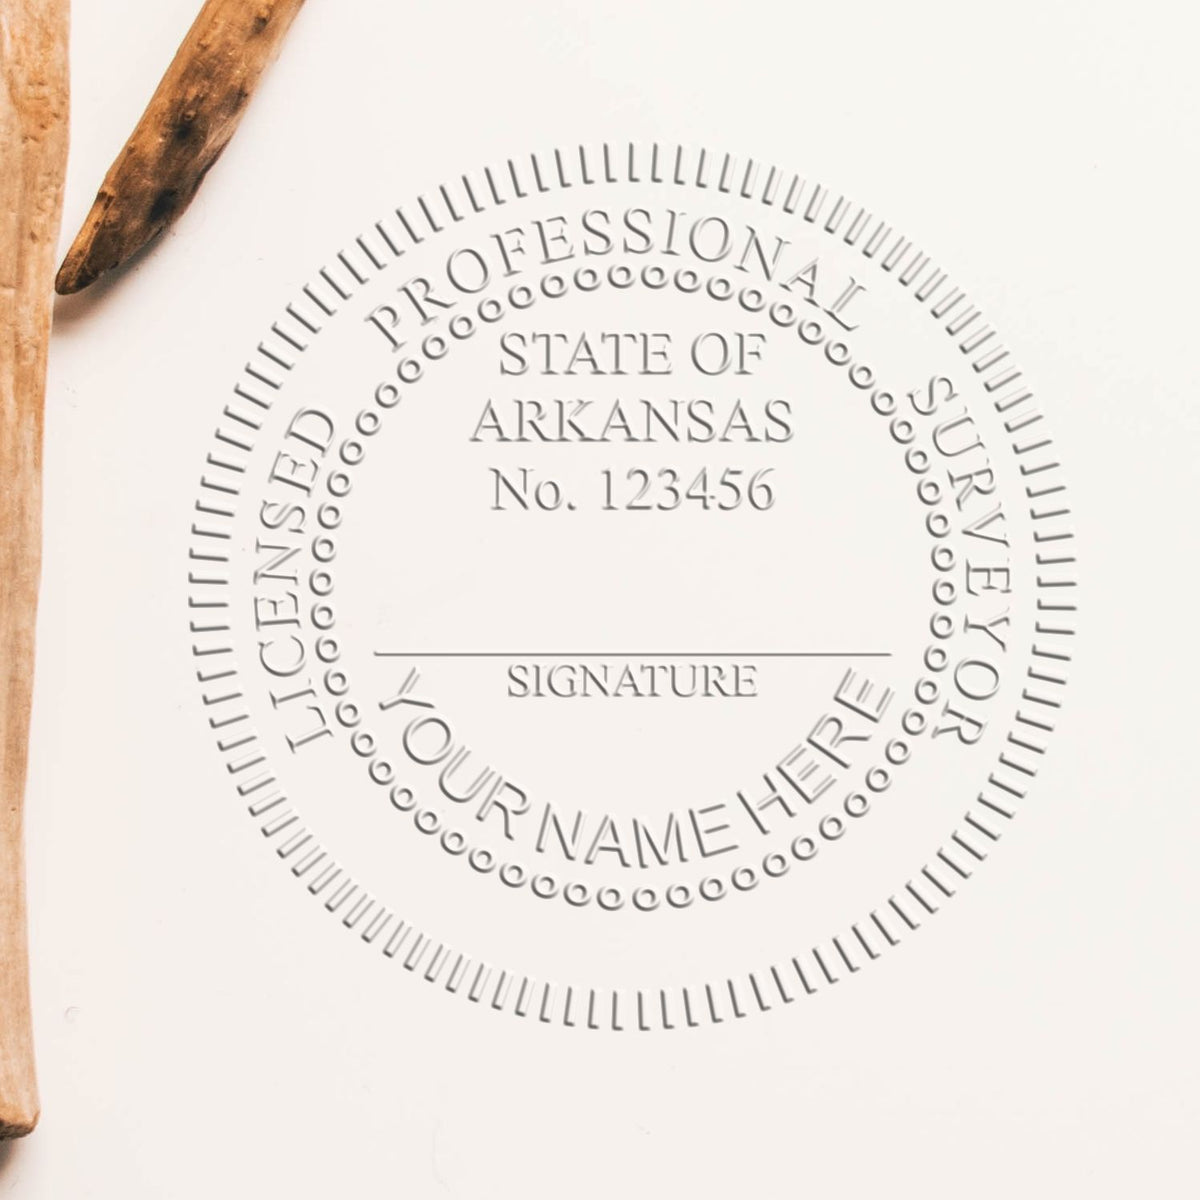 A stamped impression of the Long Reach Arkansas Land Surveyor Seal in this stylish lifestyle photo, setting the tone for a unique and personalized product.